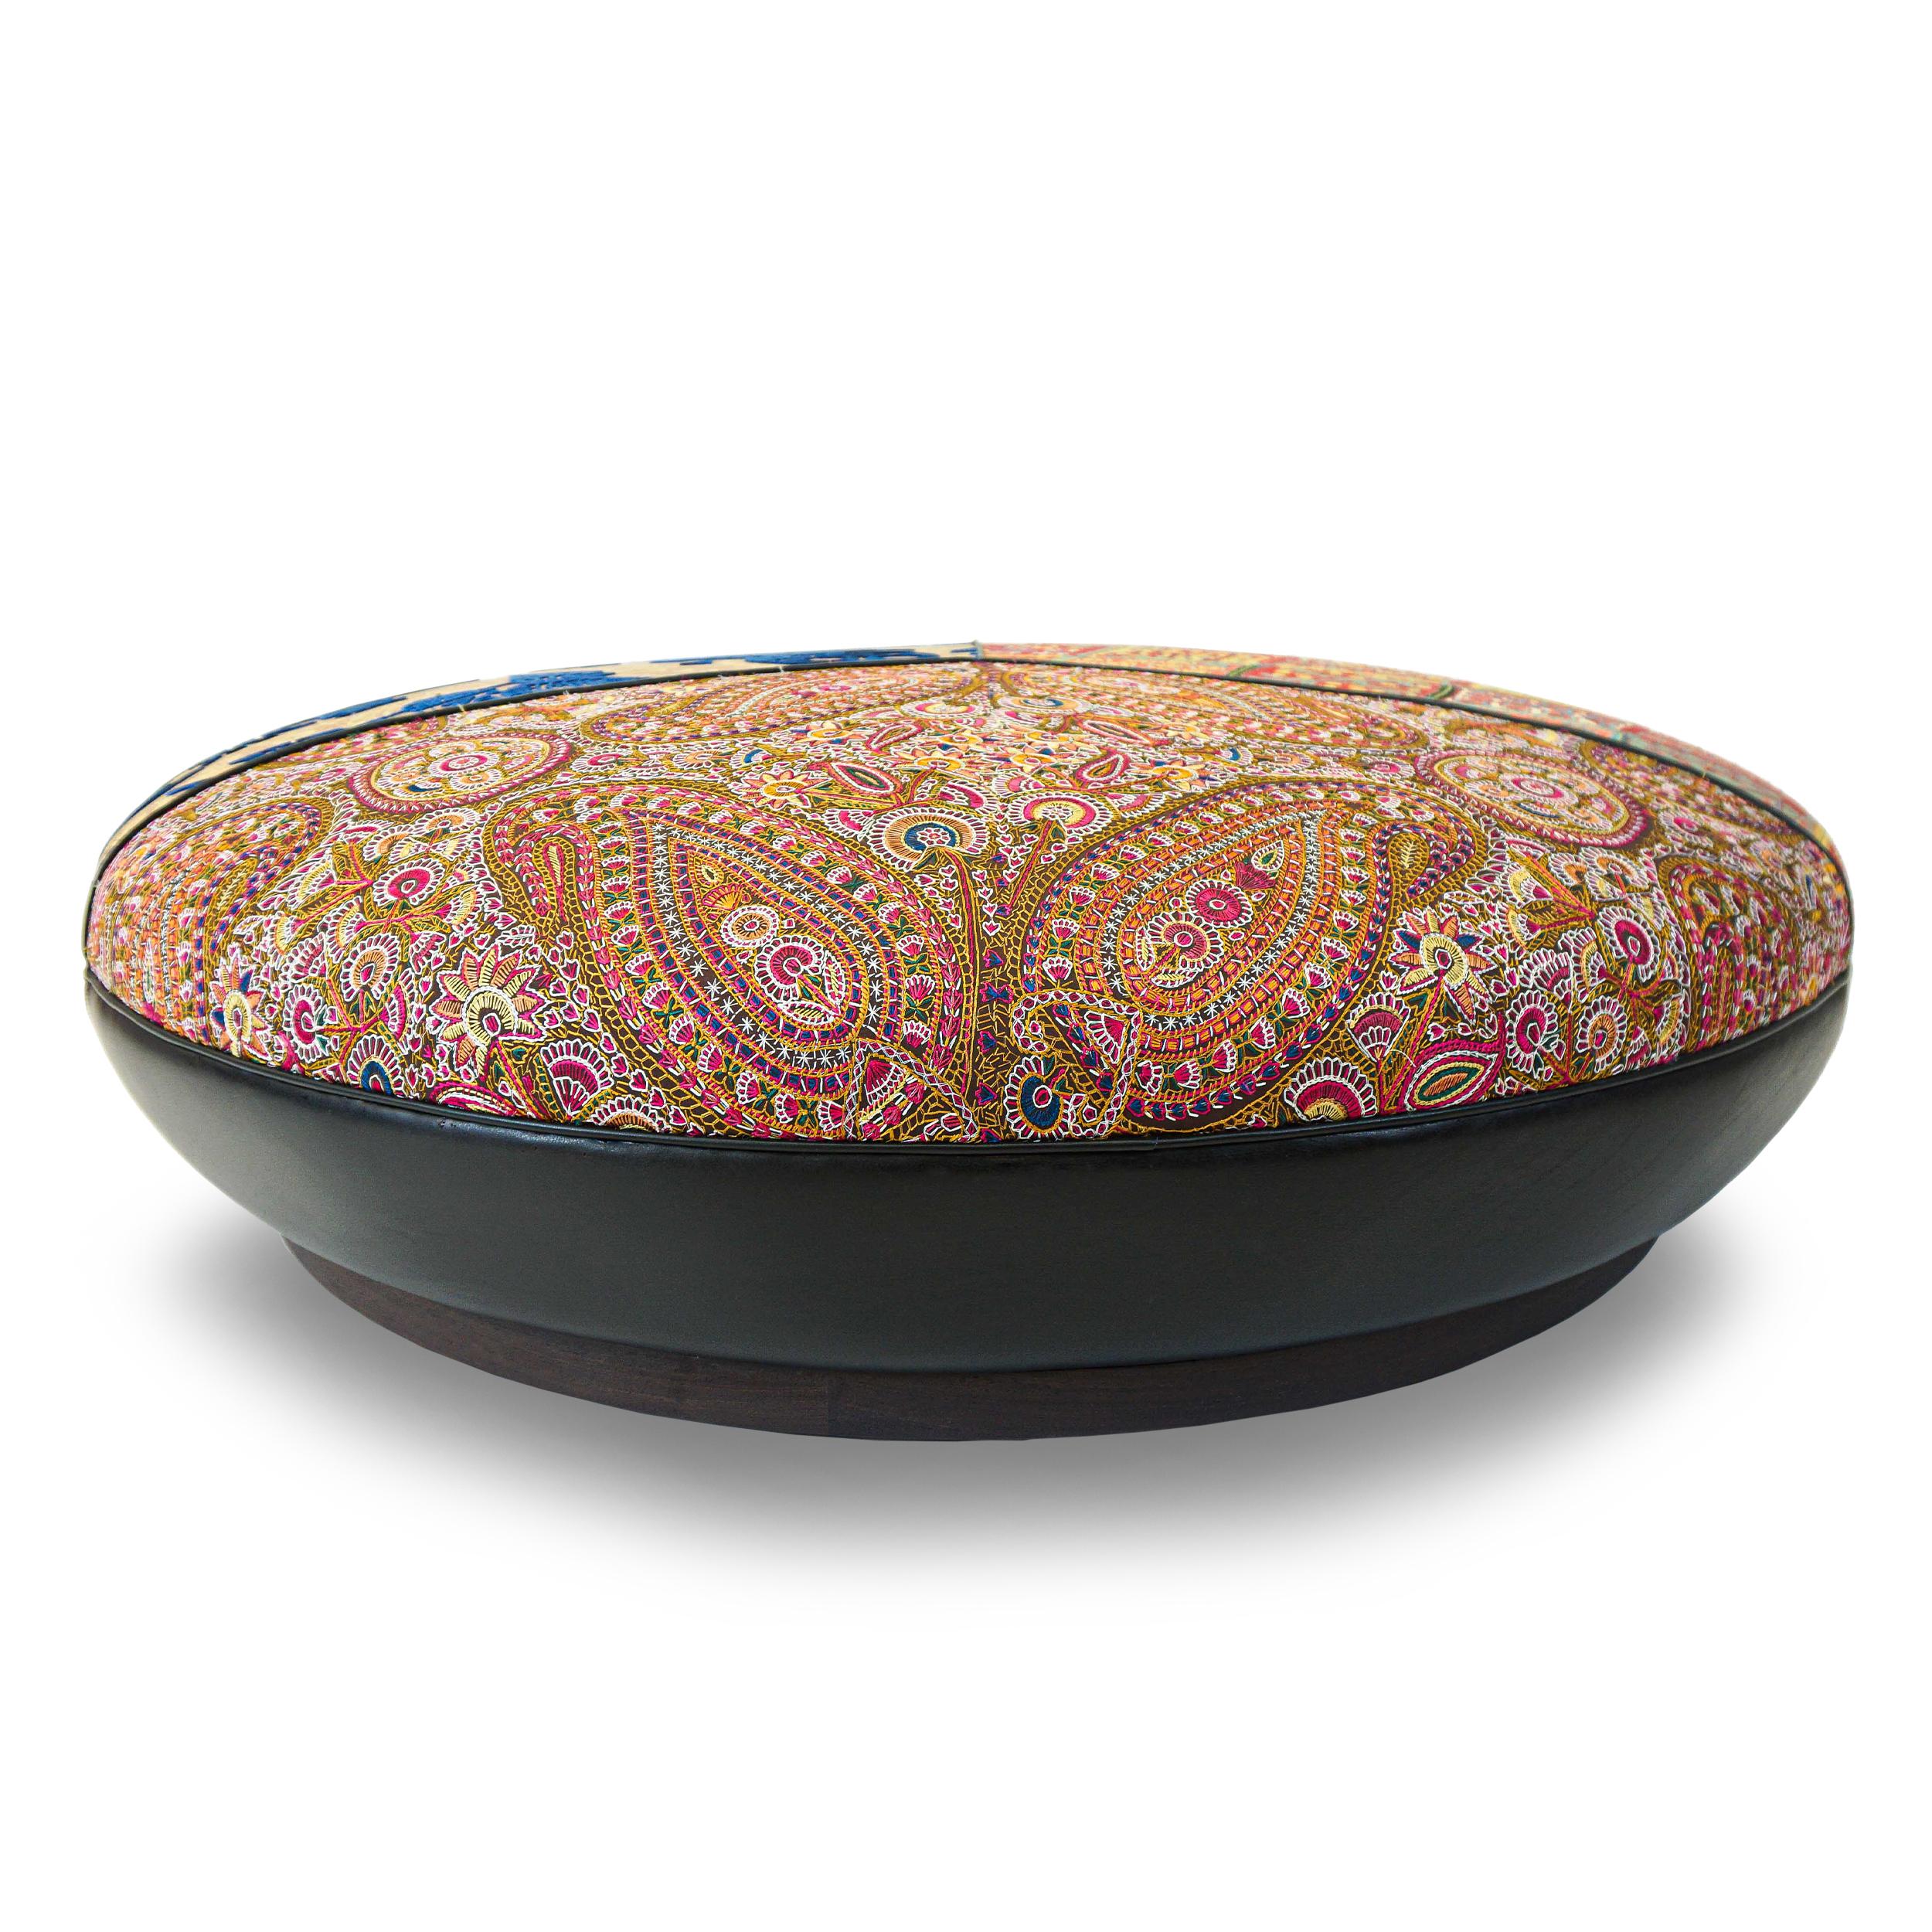 Large Round Upholstered Moroccan-Inspired Ottoman, Customizable For Sale 2